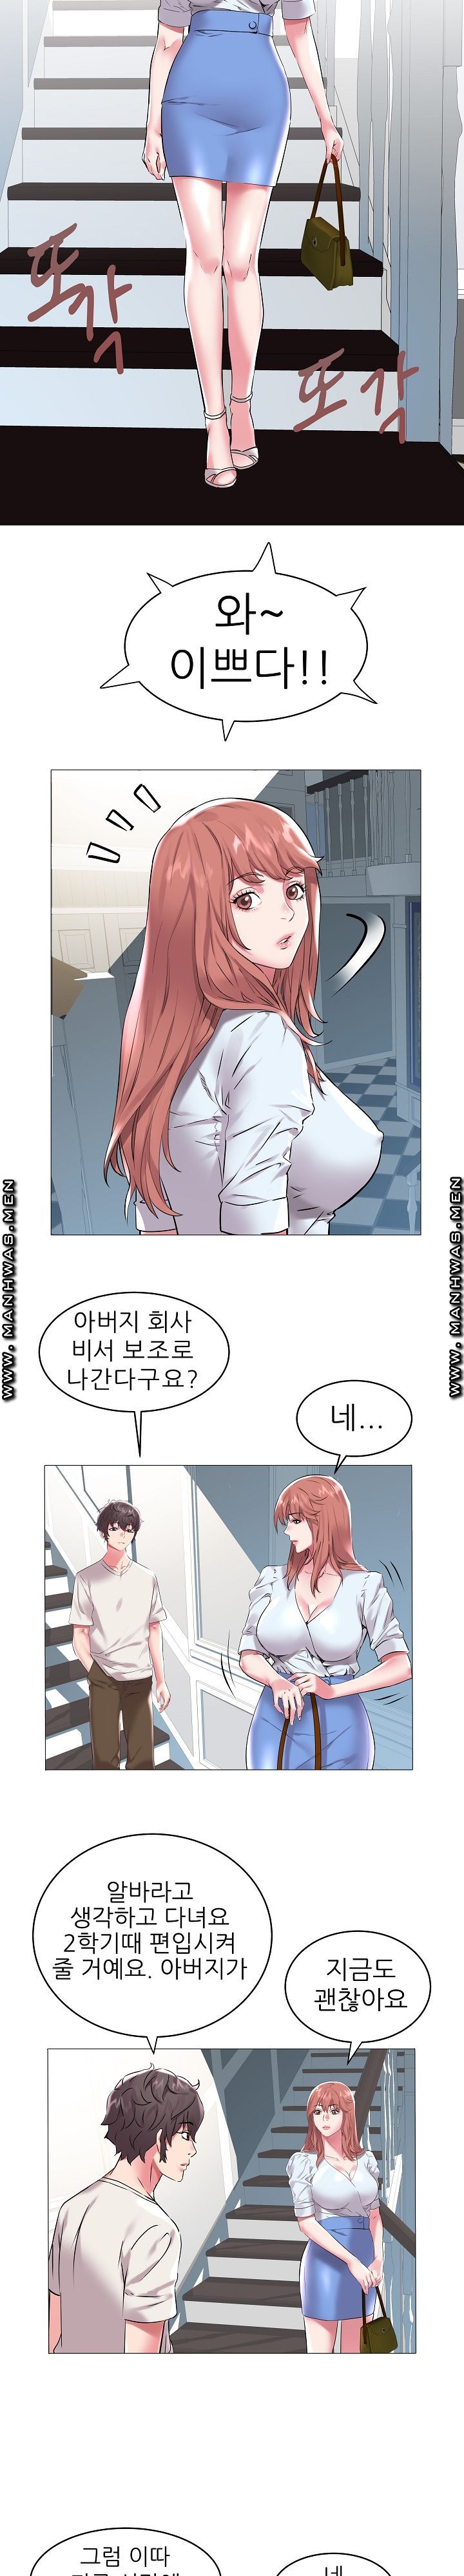 Women Divers Raw - Chapter 8 Page 10